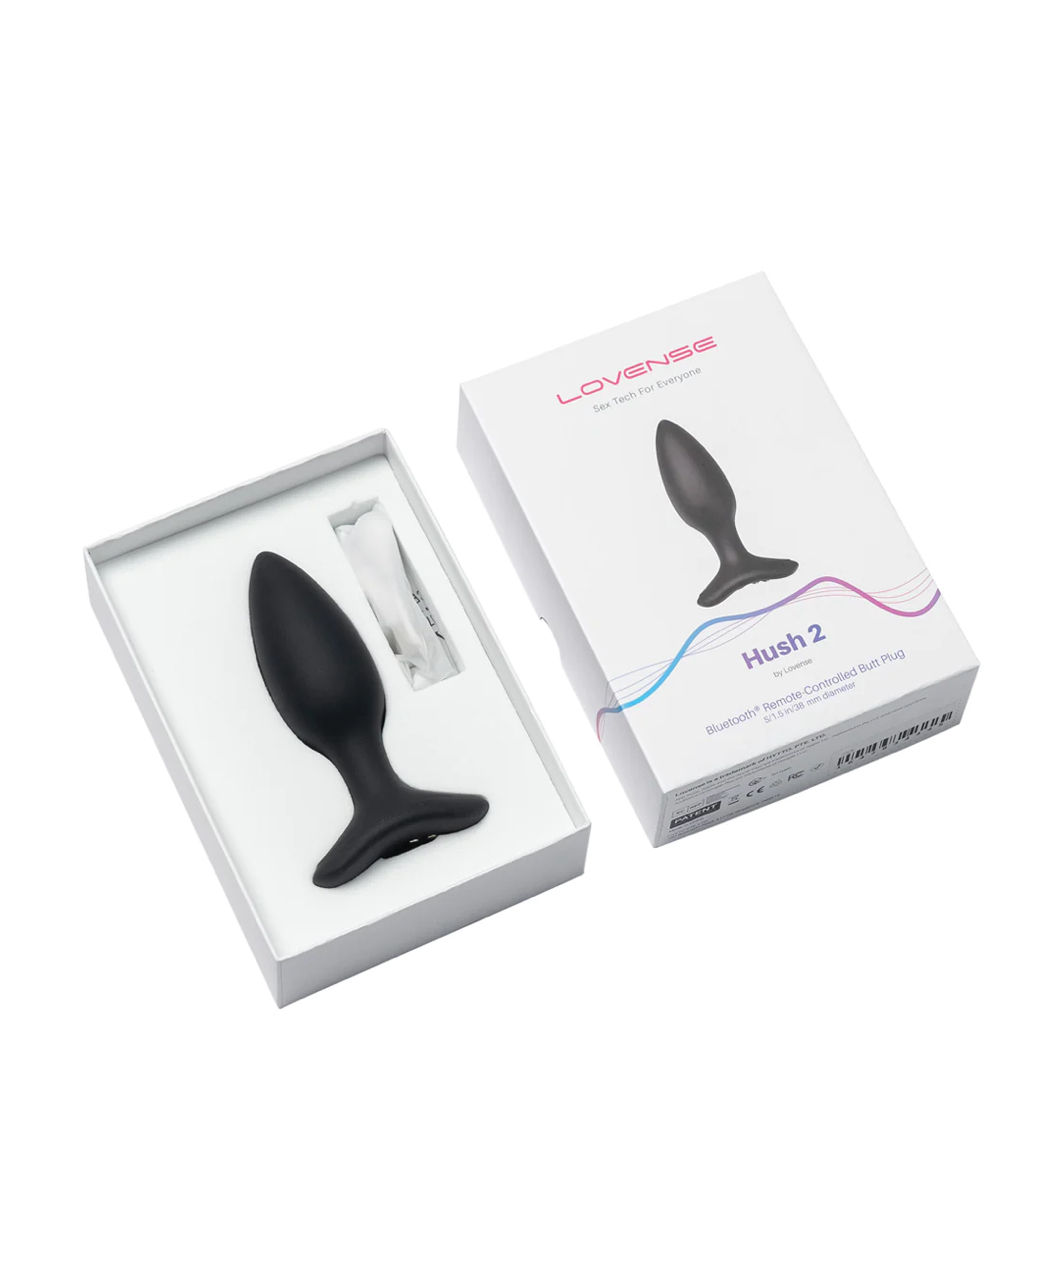 Lovense Hush 2 Small programmable remote-controlled butt plug